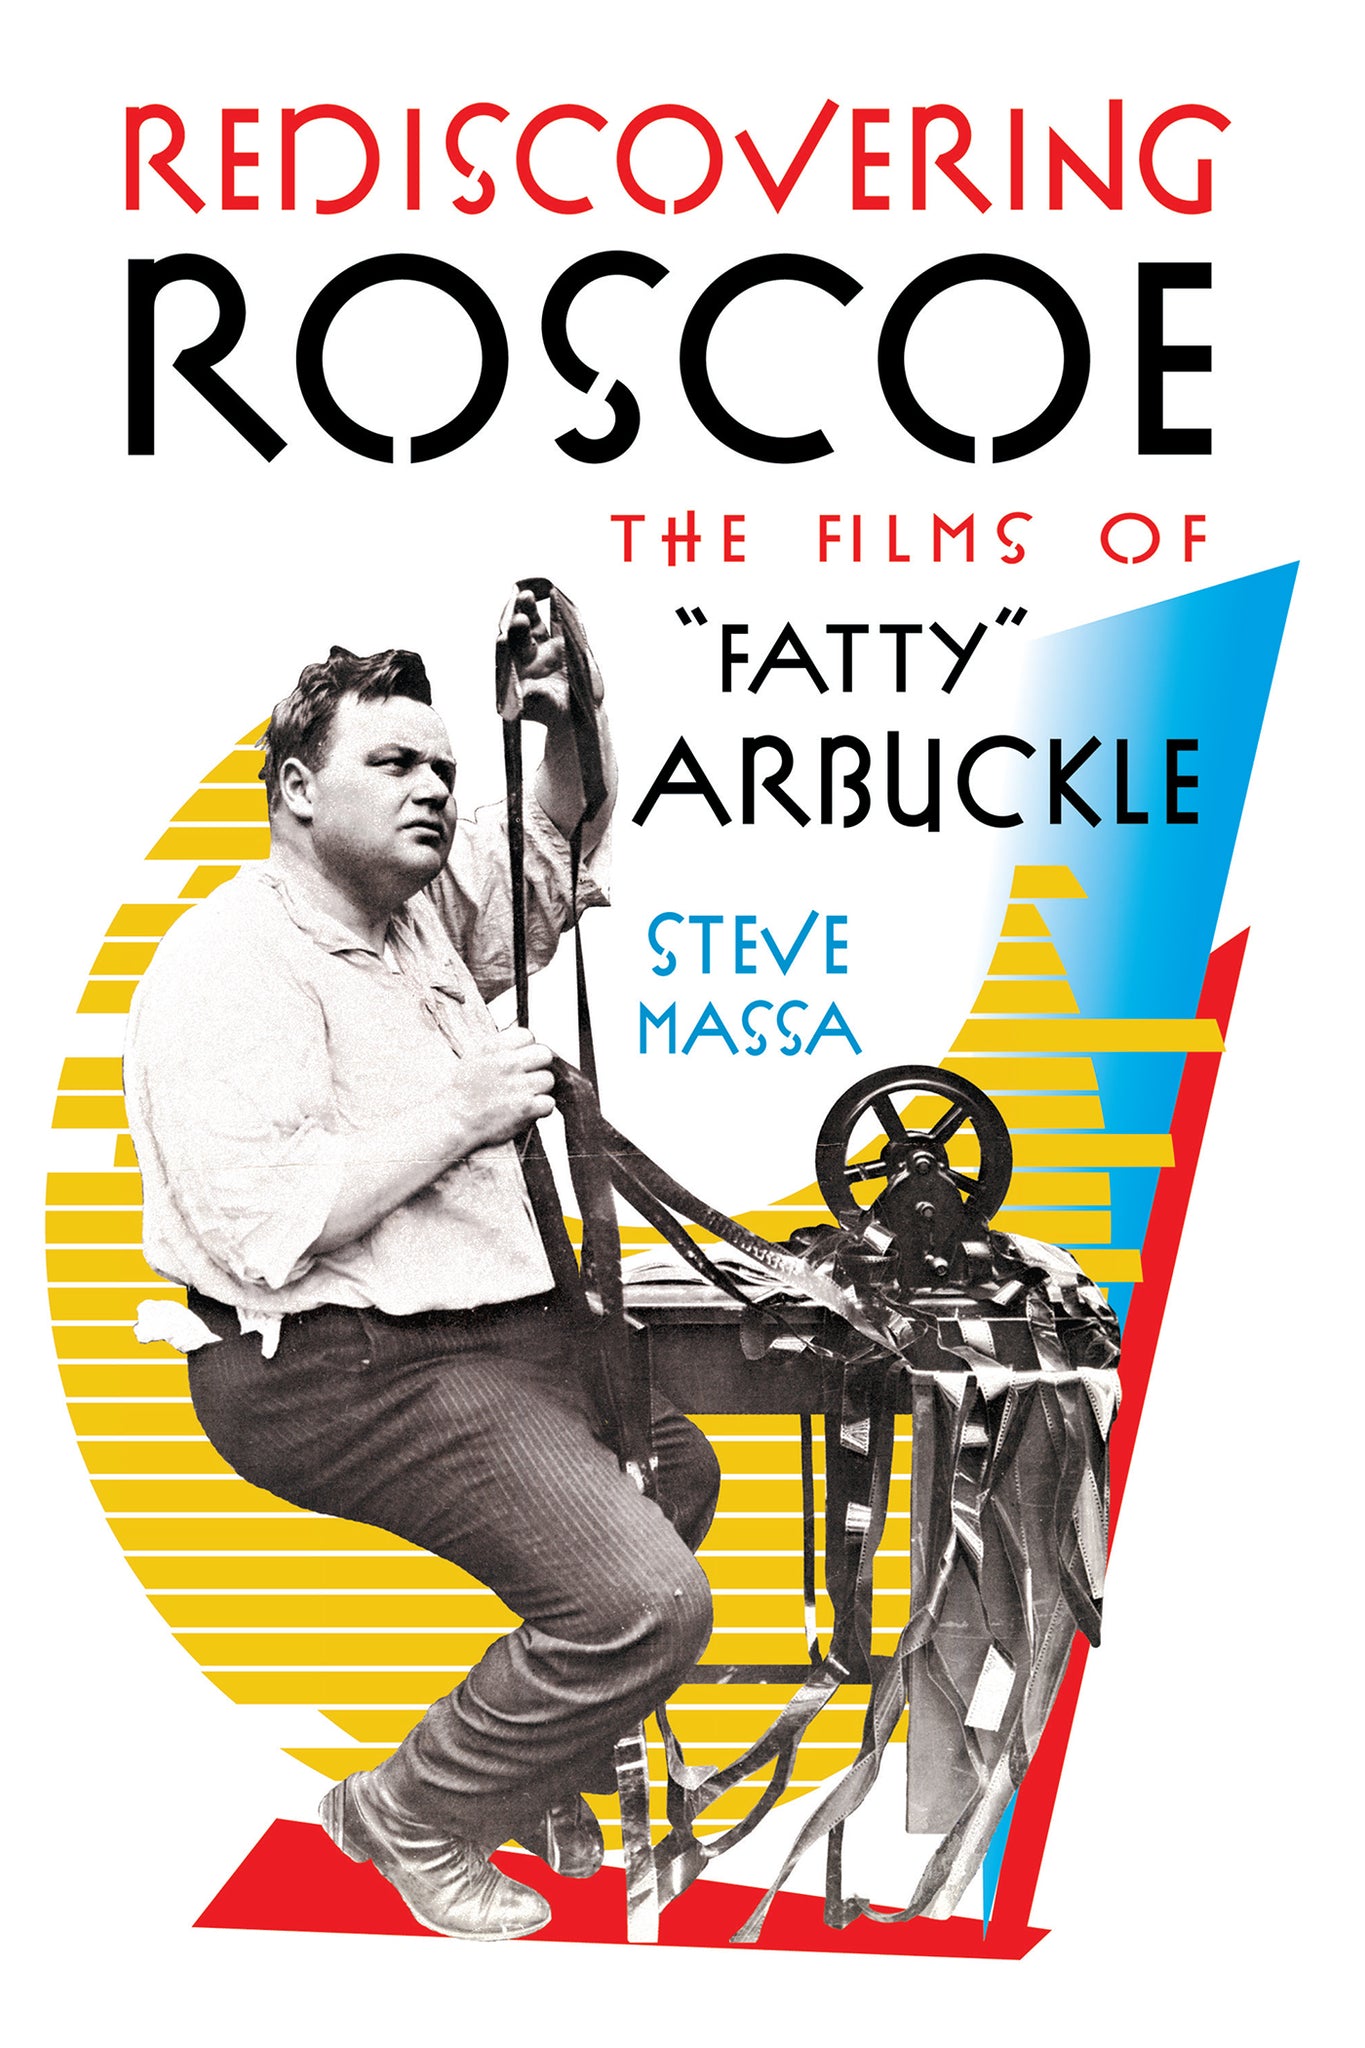 REDISCOVERING ROSCOE: THE FILMS OF "FATTY" ARBUCKLE (hardback)